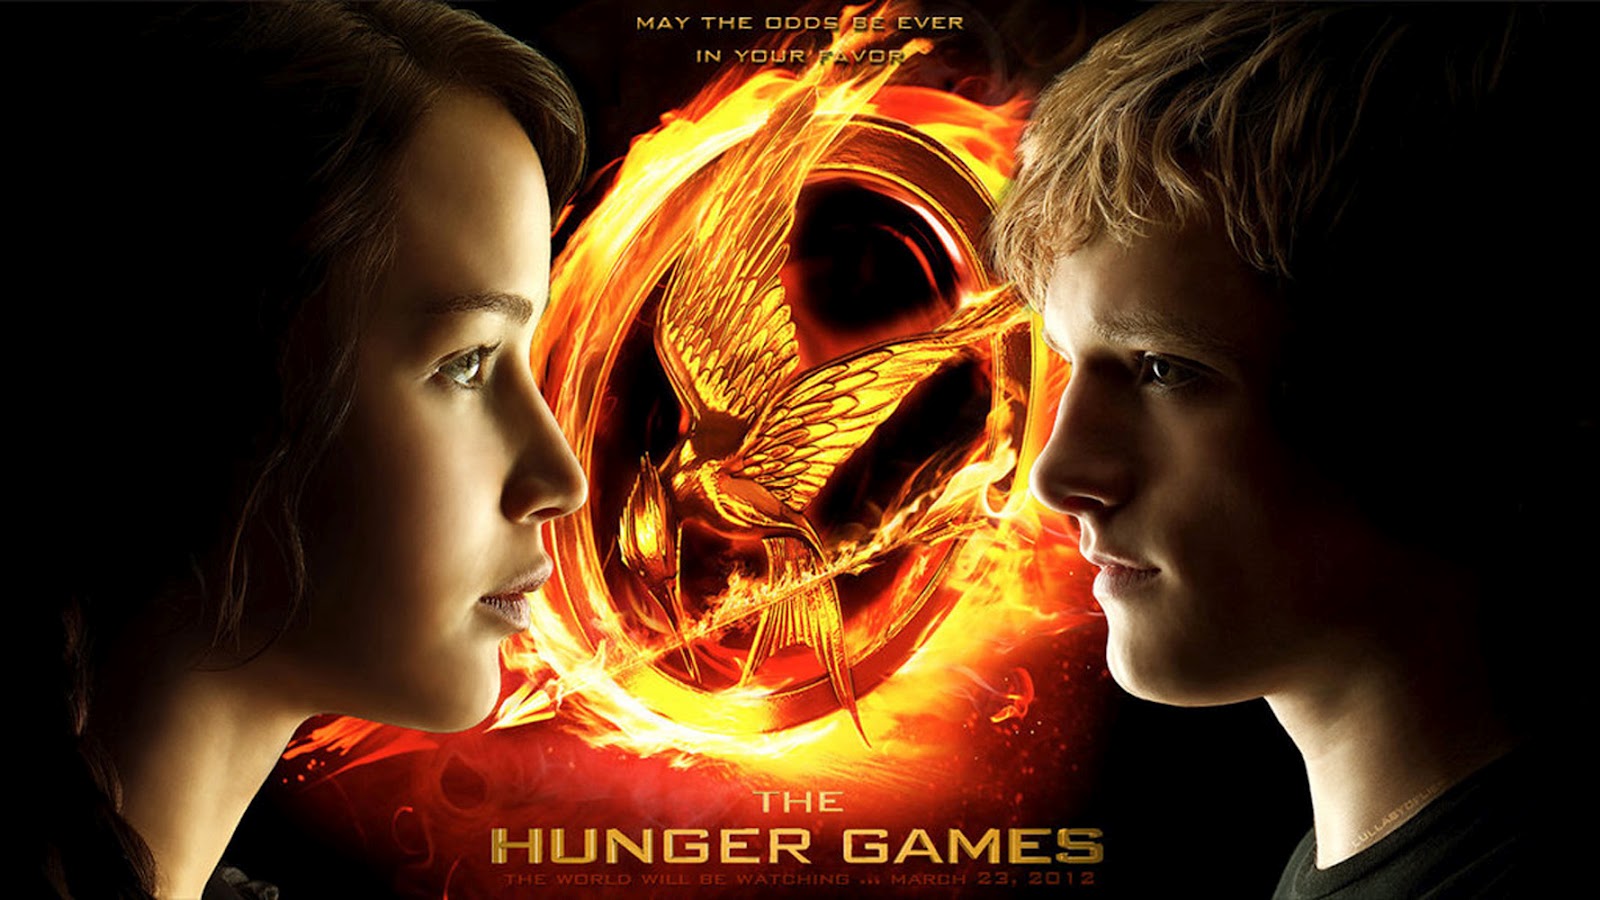 The HUNGER GAMES DVD GIVEAWAY Hello Welcome to my blog